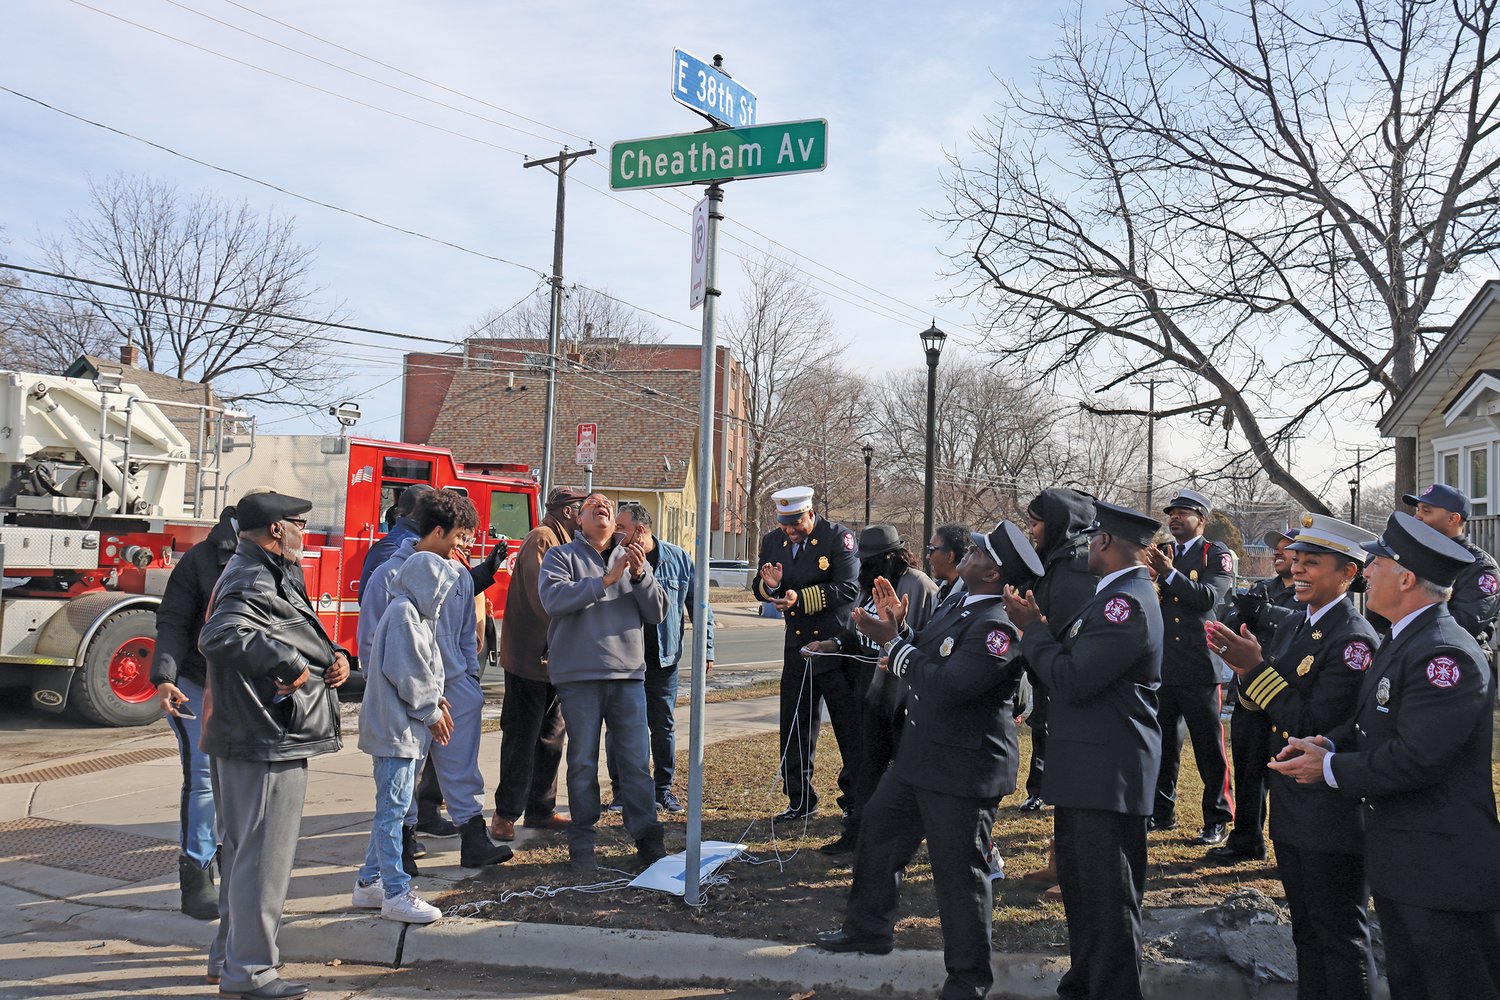 The descendants of John Cheatham, the city’s first Black fire chief, local leaders, and members of the African American Firefighters Association gather to rename Dight Ave. on March 17, 2022. (Photo by Tesha M. Christensen)